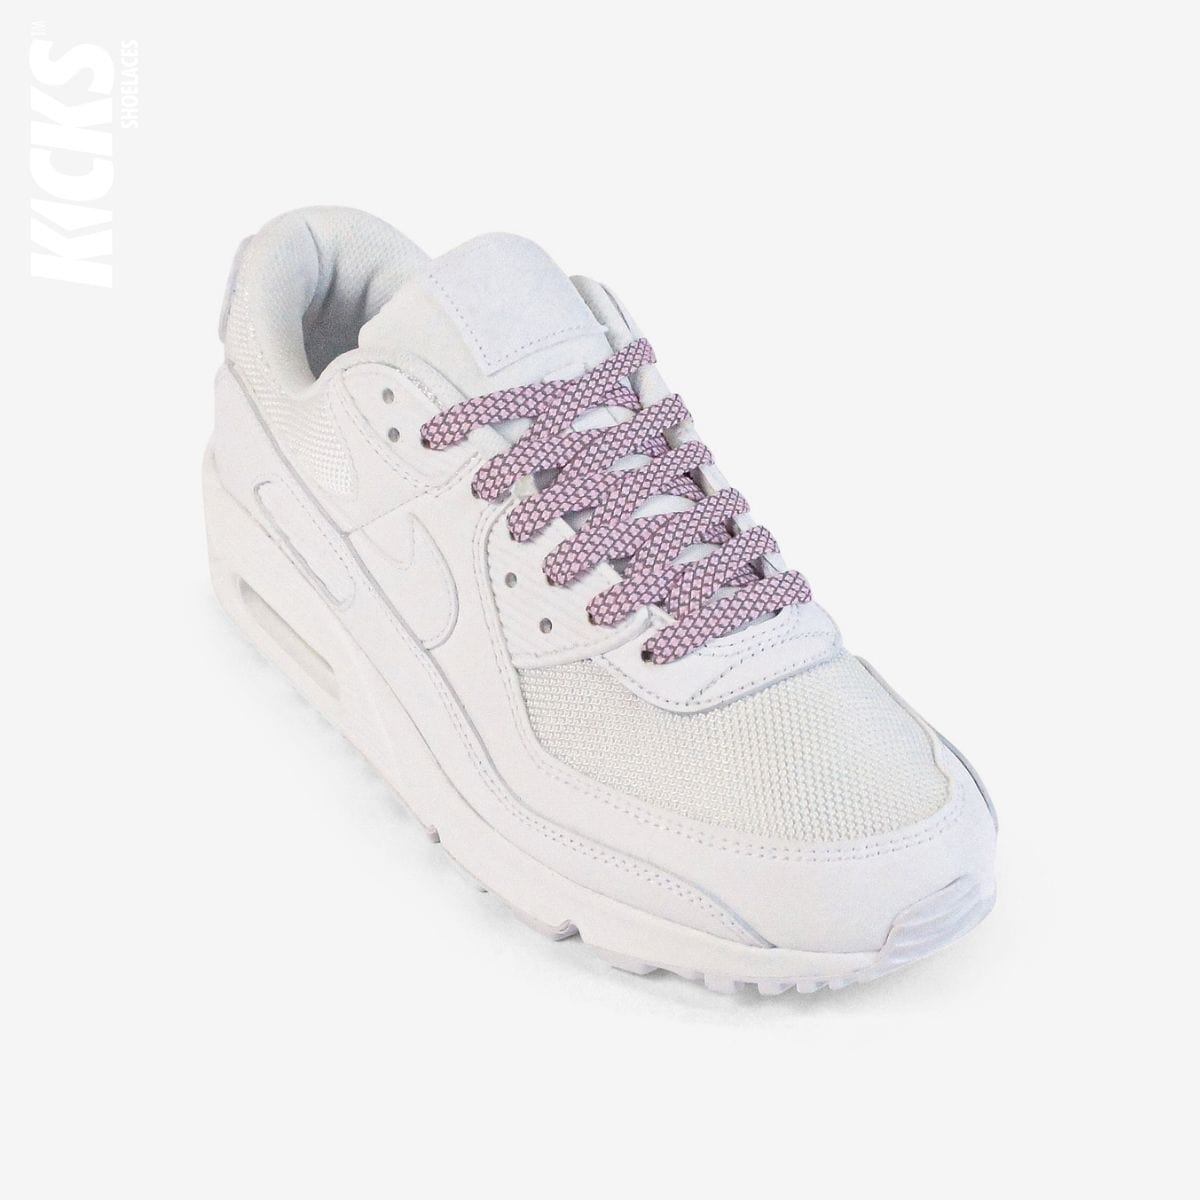 pink-reflective-colored-shoelaces-on-white-sneakers